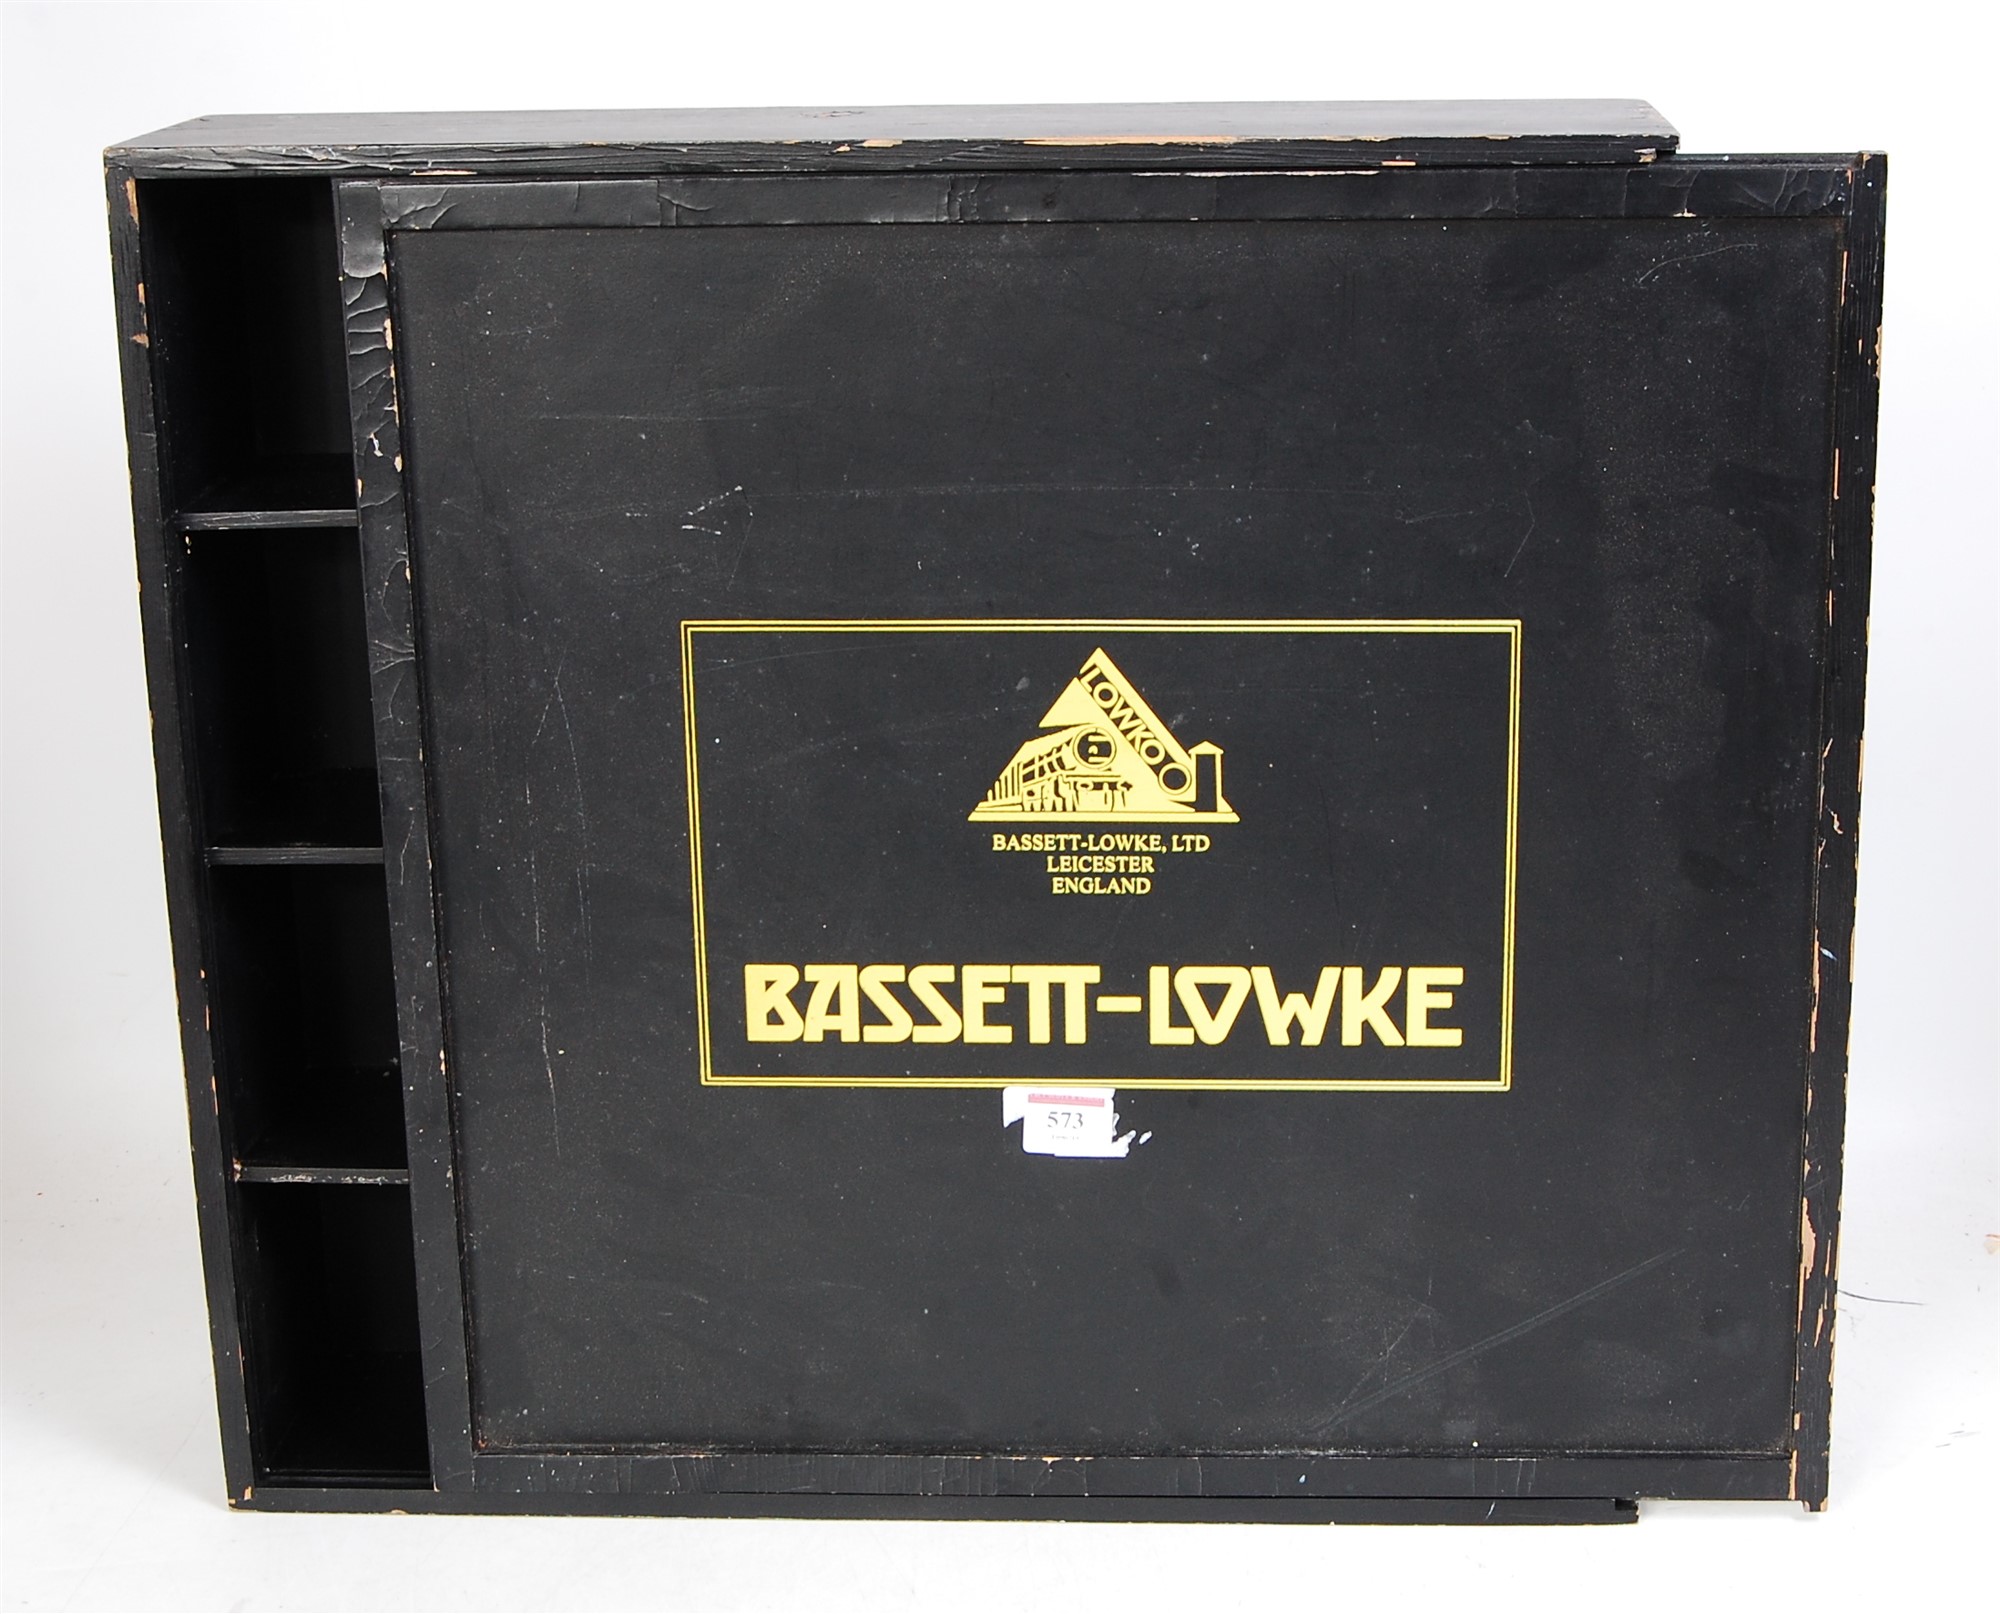 Home made wooden box painted black, stencilled yellow "Bassett Lowke" to take four bogie coaches (